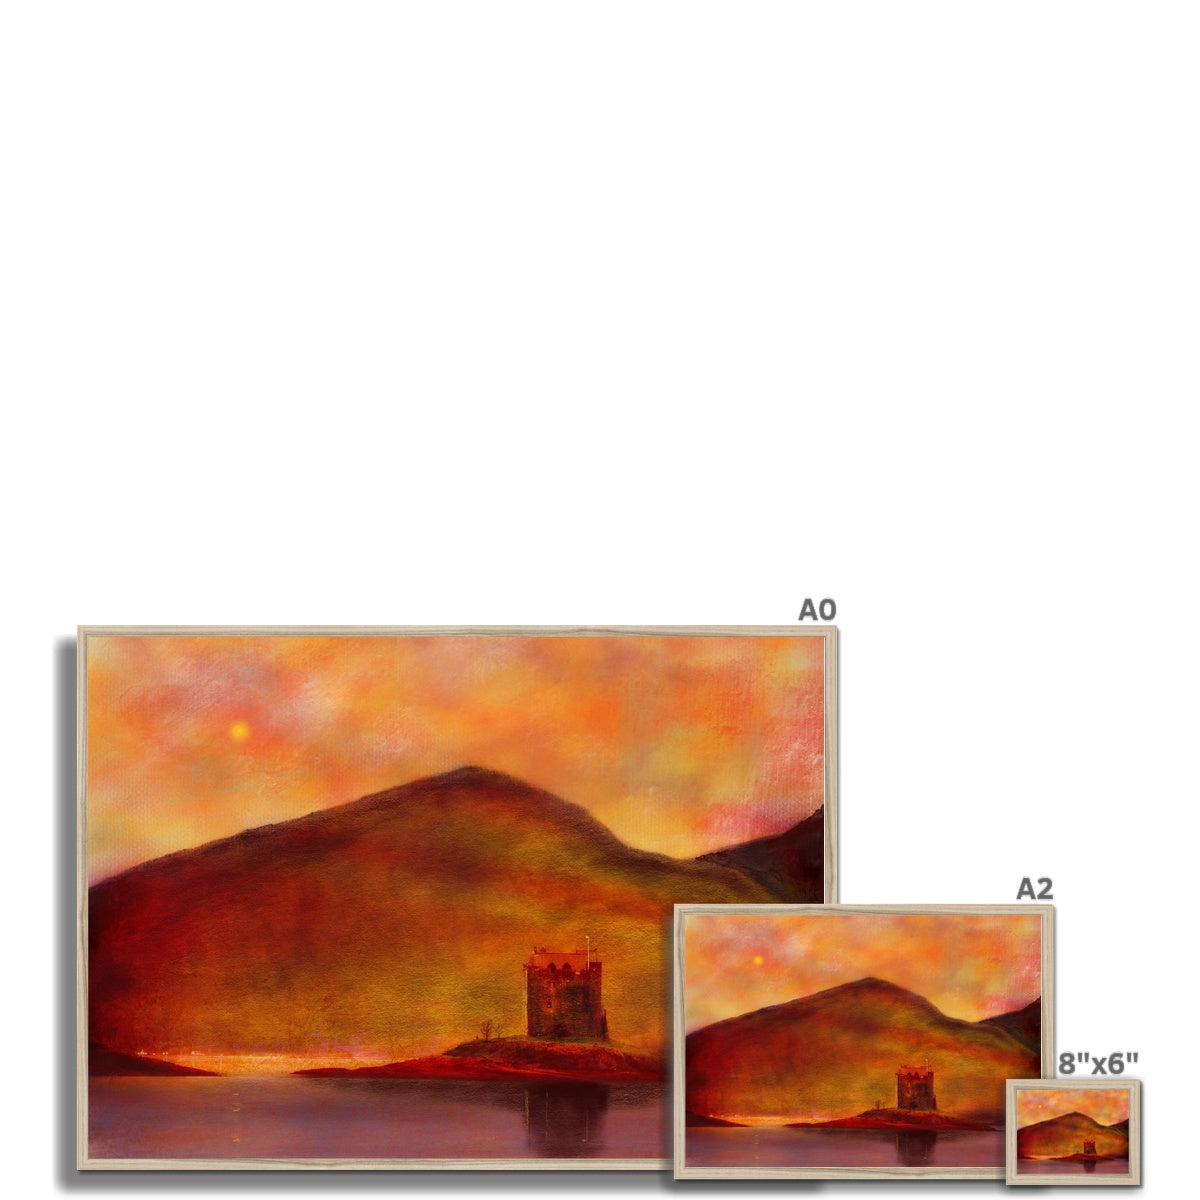 Castle Stalker Sunset Painting | Framed Prints From Scotland-Framed Prints-Historic & Iconic Scotland Art Gallery-Paintings, Prints, Homeware, Art Gifts From Scotland By Scottish Artist Kevin Hunter